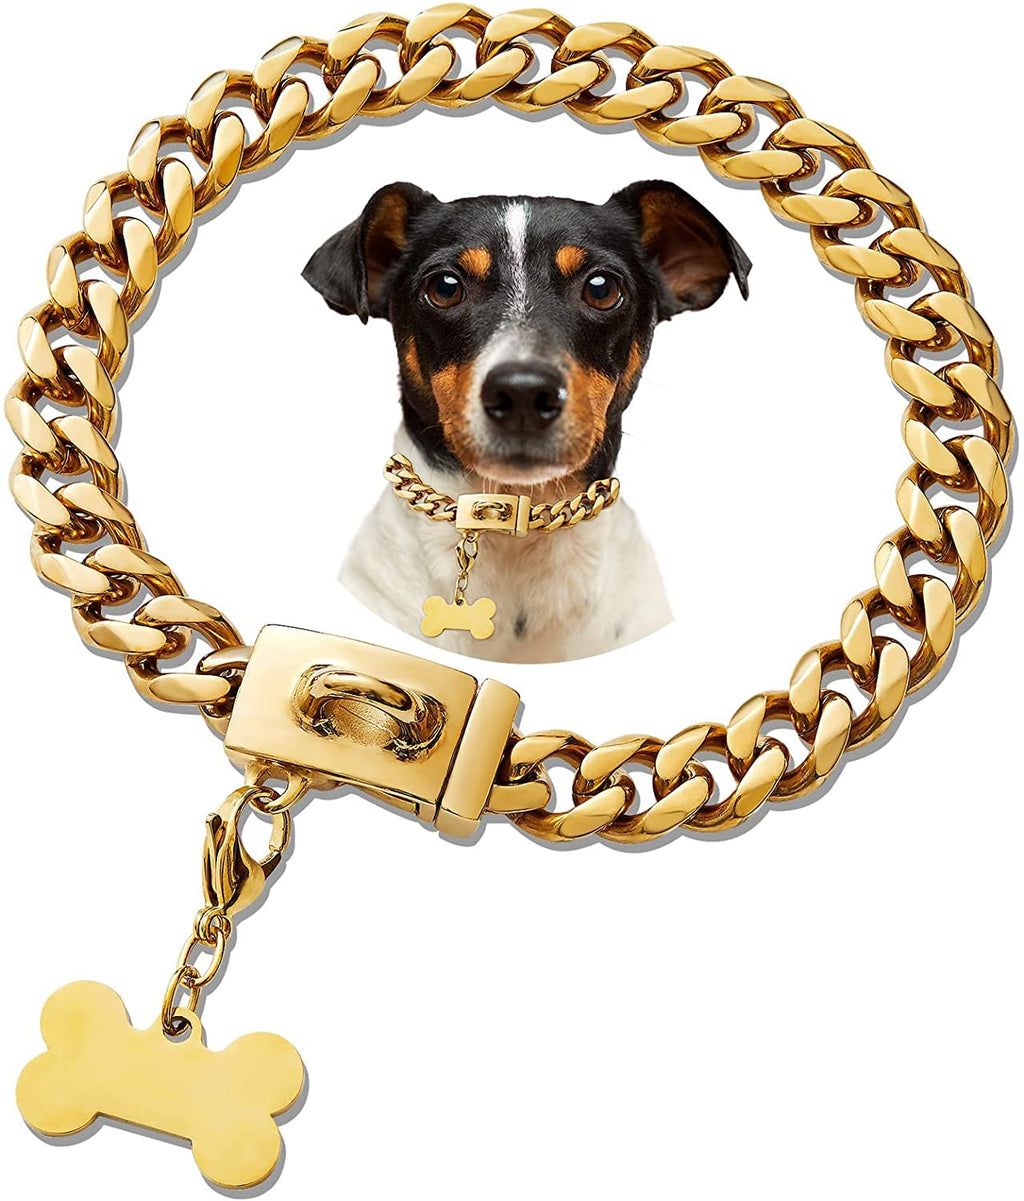 Strong Metal Dog Collars with Safety Buckle, 14mm Wide 316L Stainless Steel Cuban Link Chain Training Dog Collar Necklace for Small Medium Large Dogs Gold-1 10MM-12IN - PawsPlanet Australia